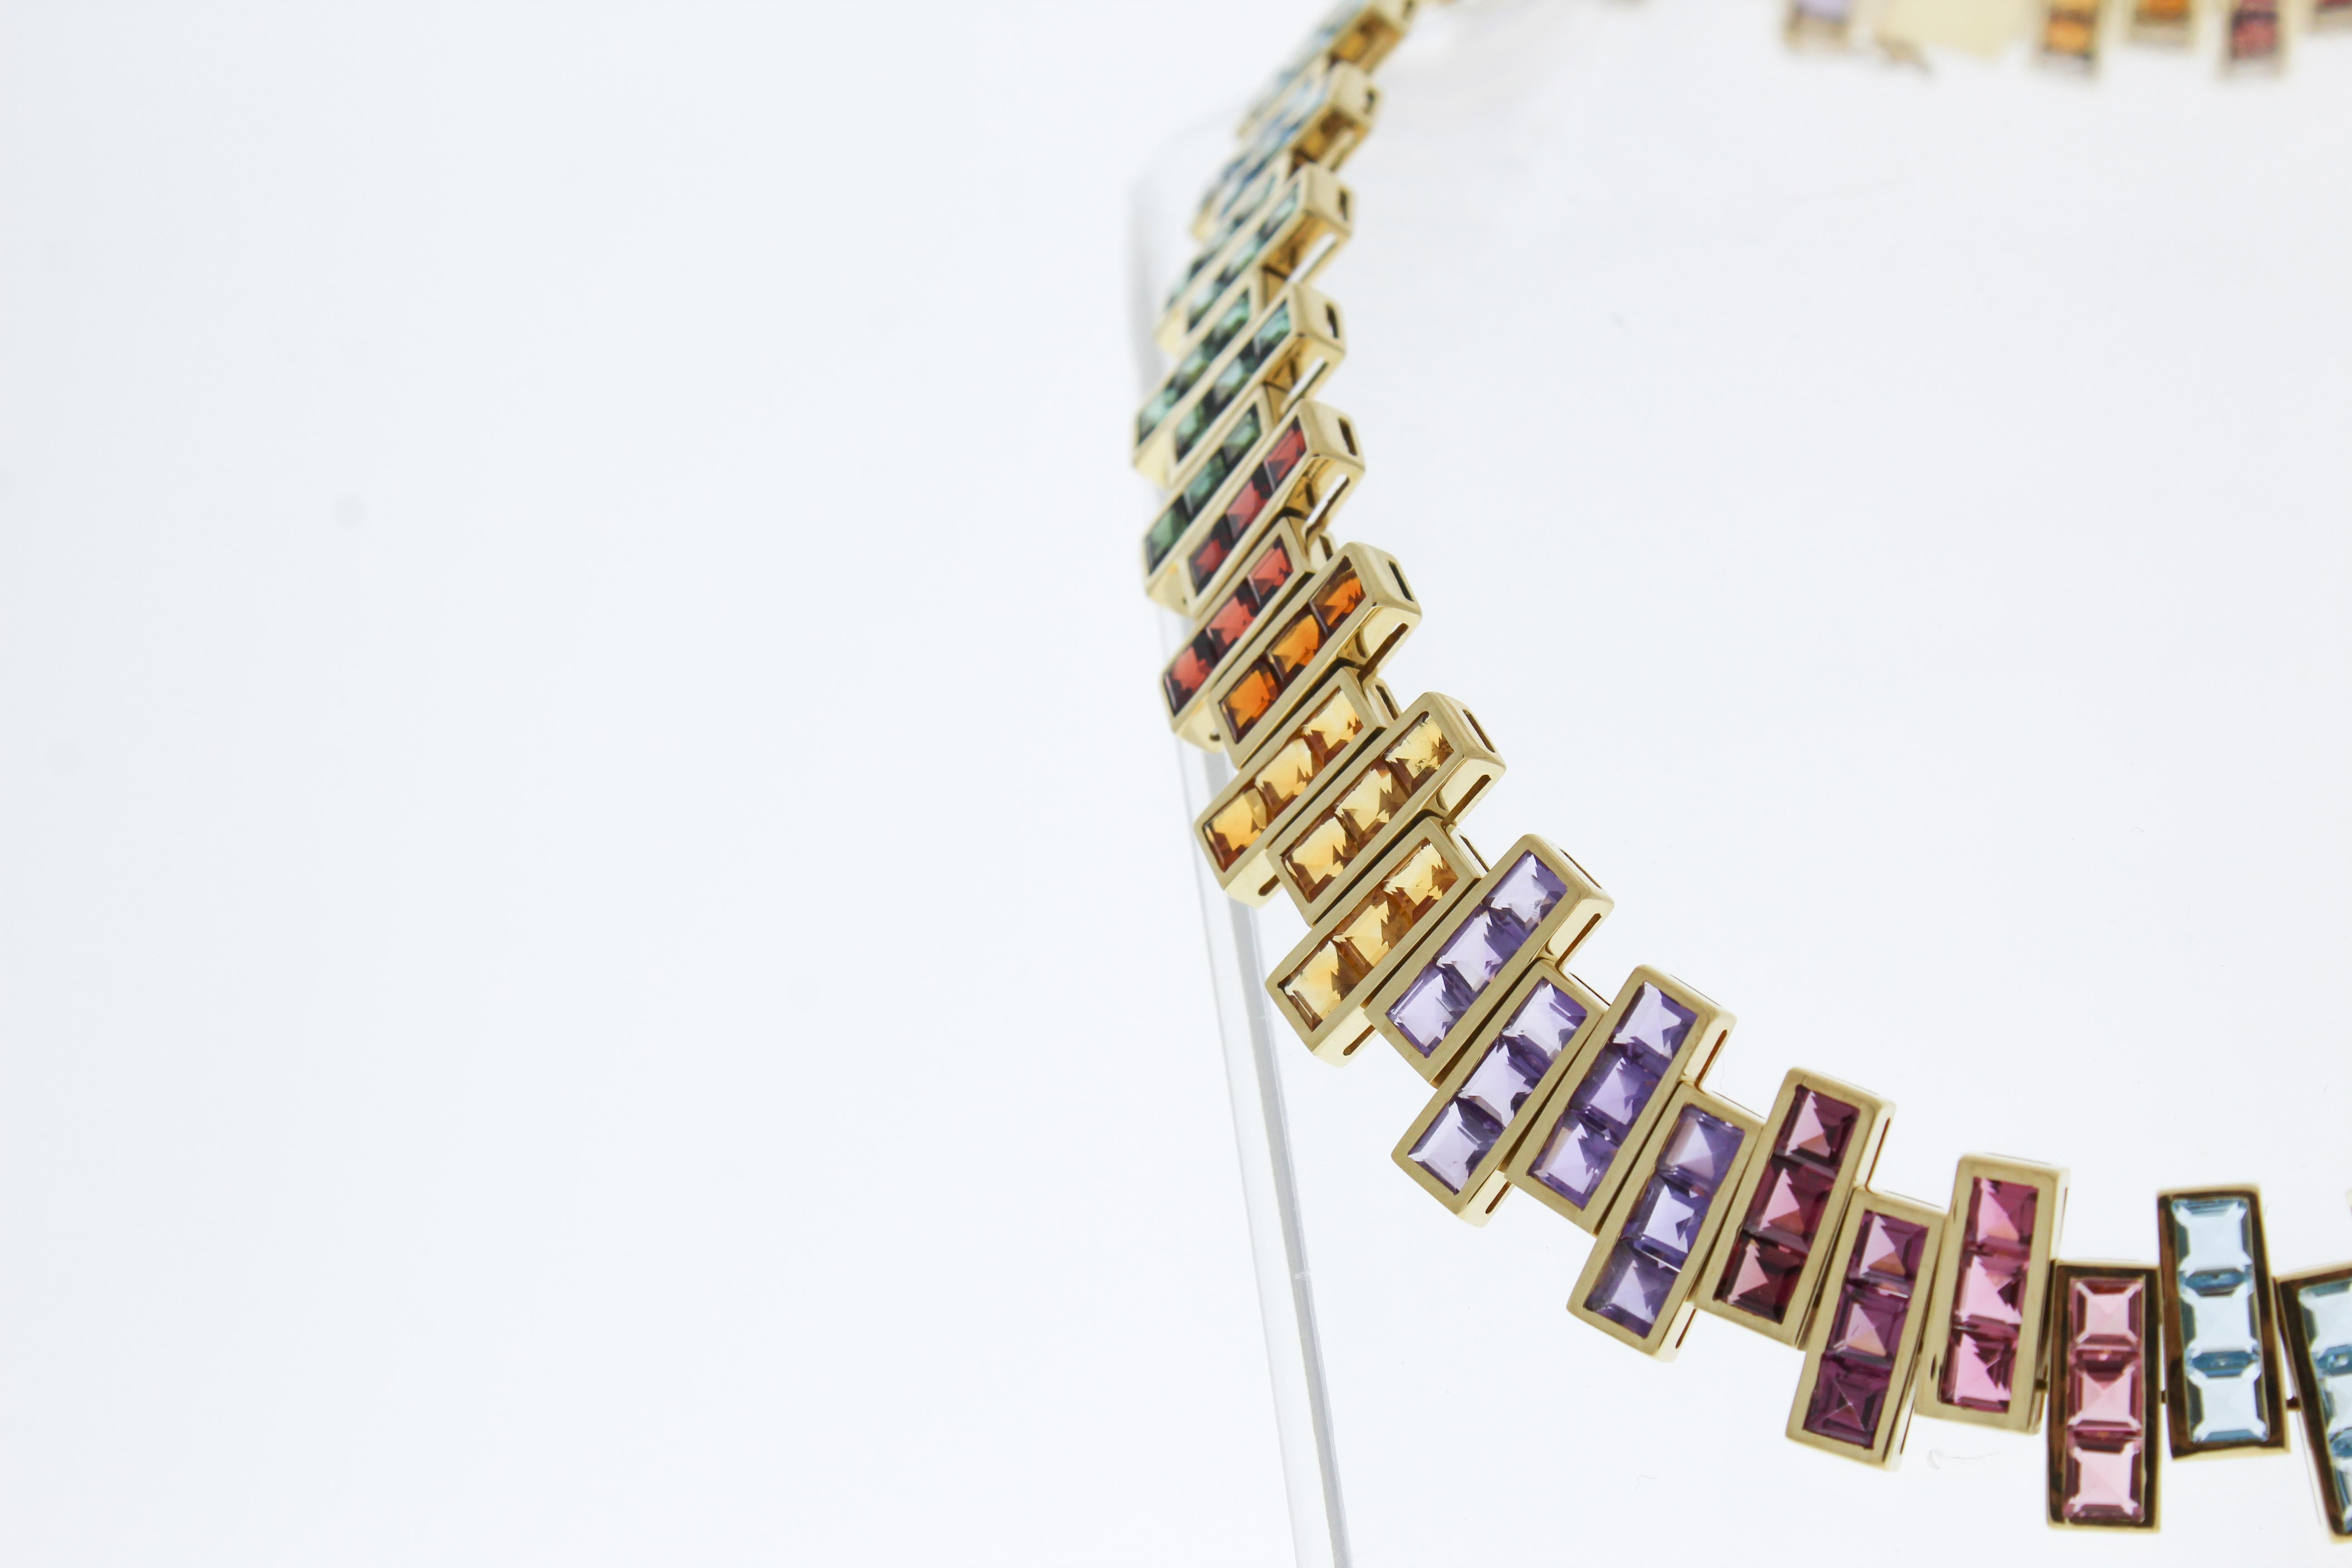 This stunning 18k Yellow Gold has an array of mixed gemstones that pop in color. This necklace features 207 princess cut gemstones, totaling up to 25CTW.